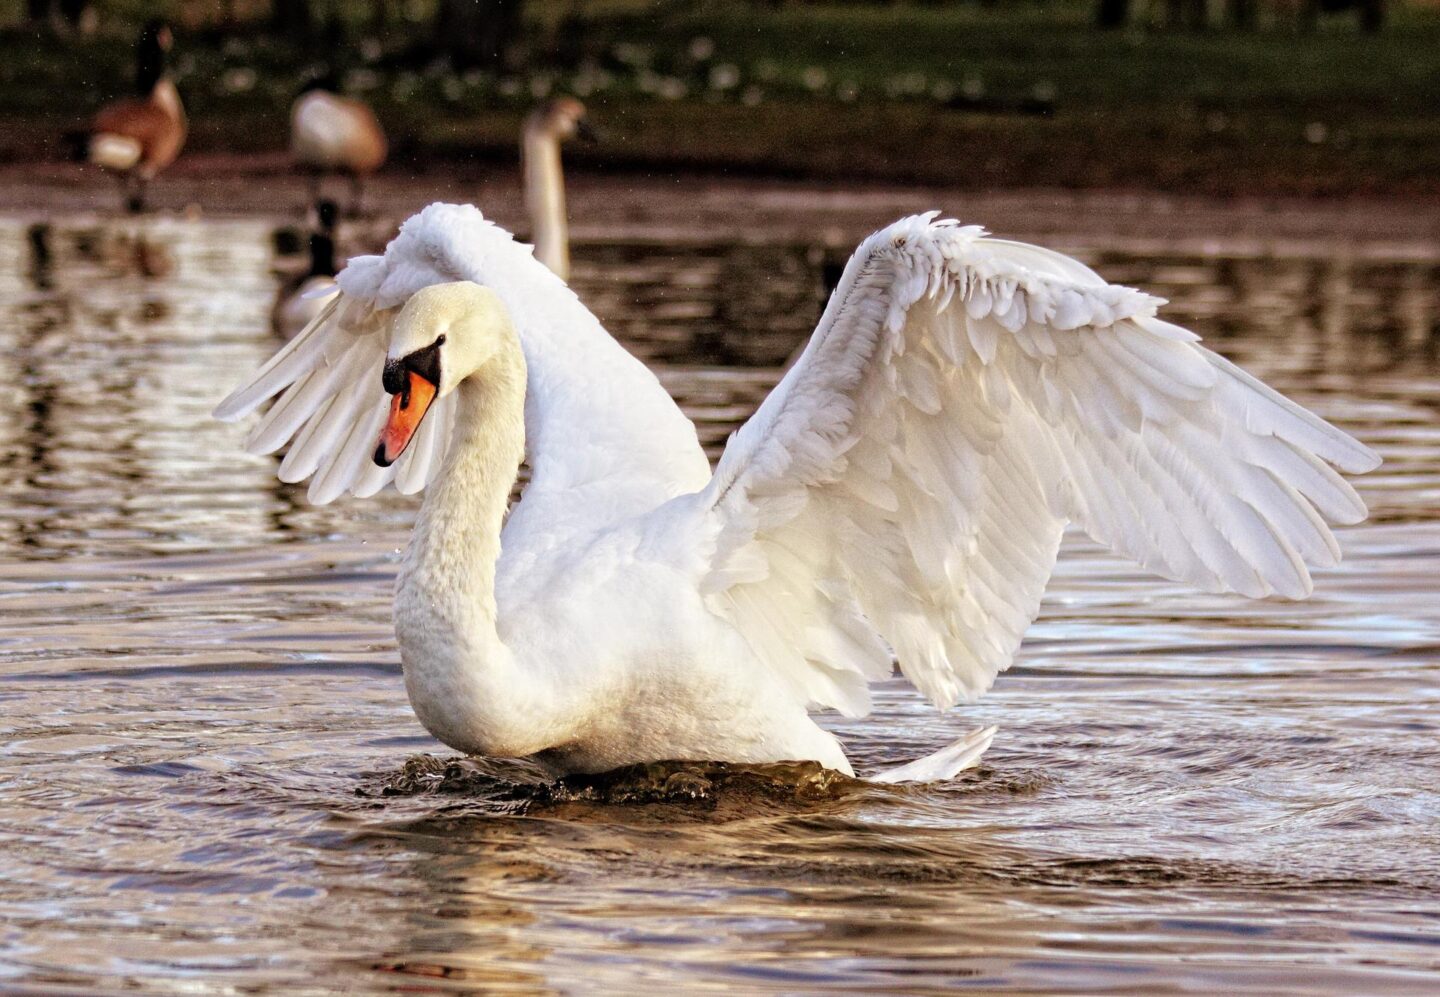  how to protect wildlife, Swan at park